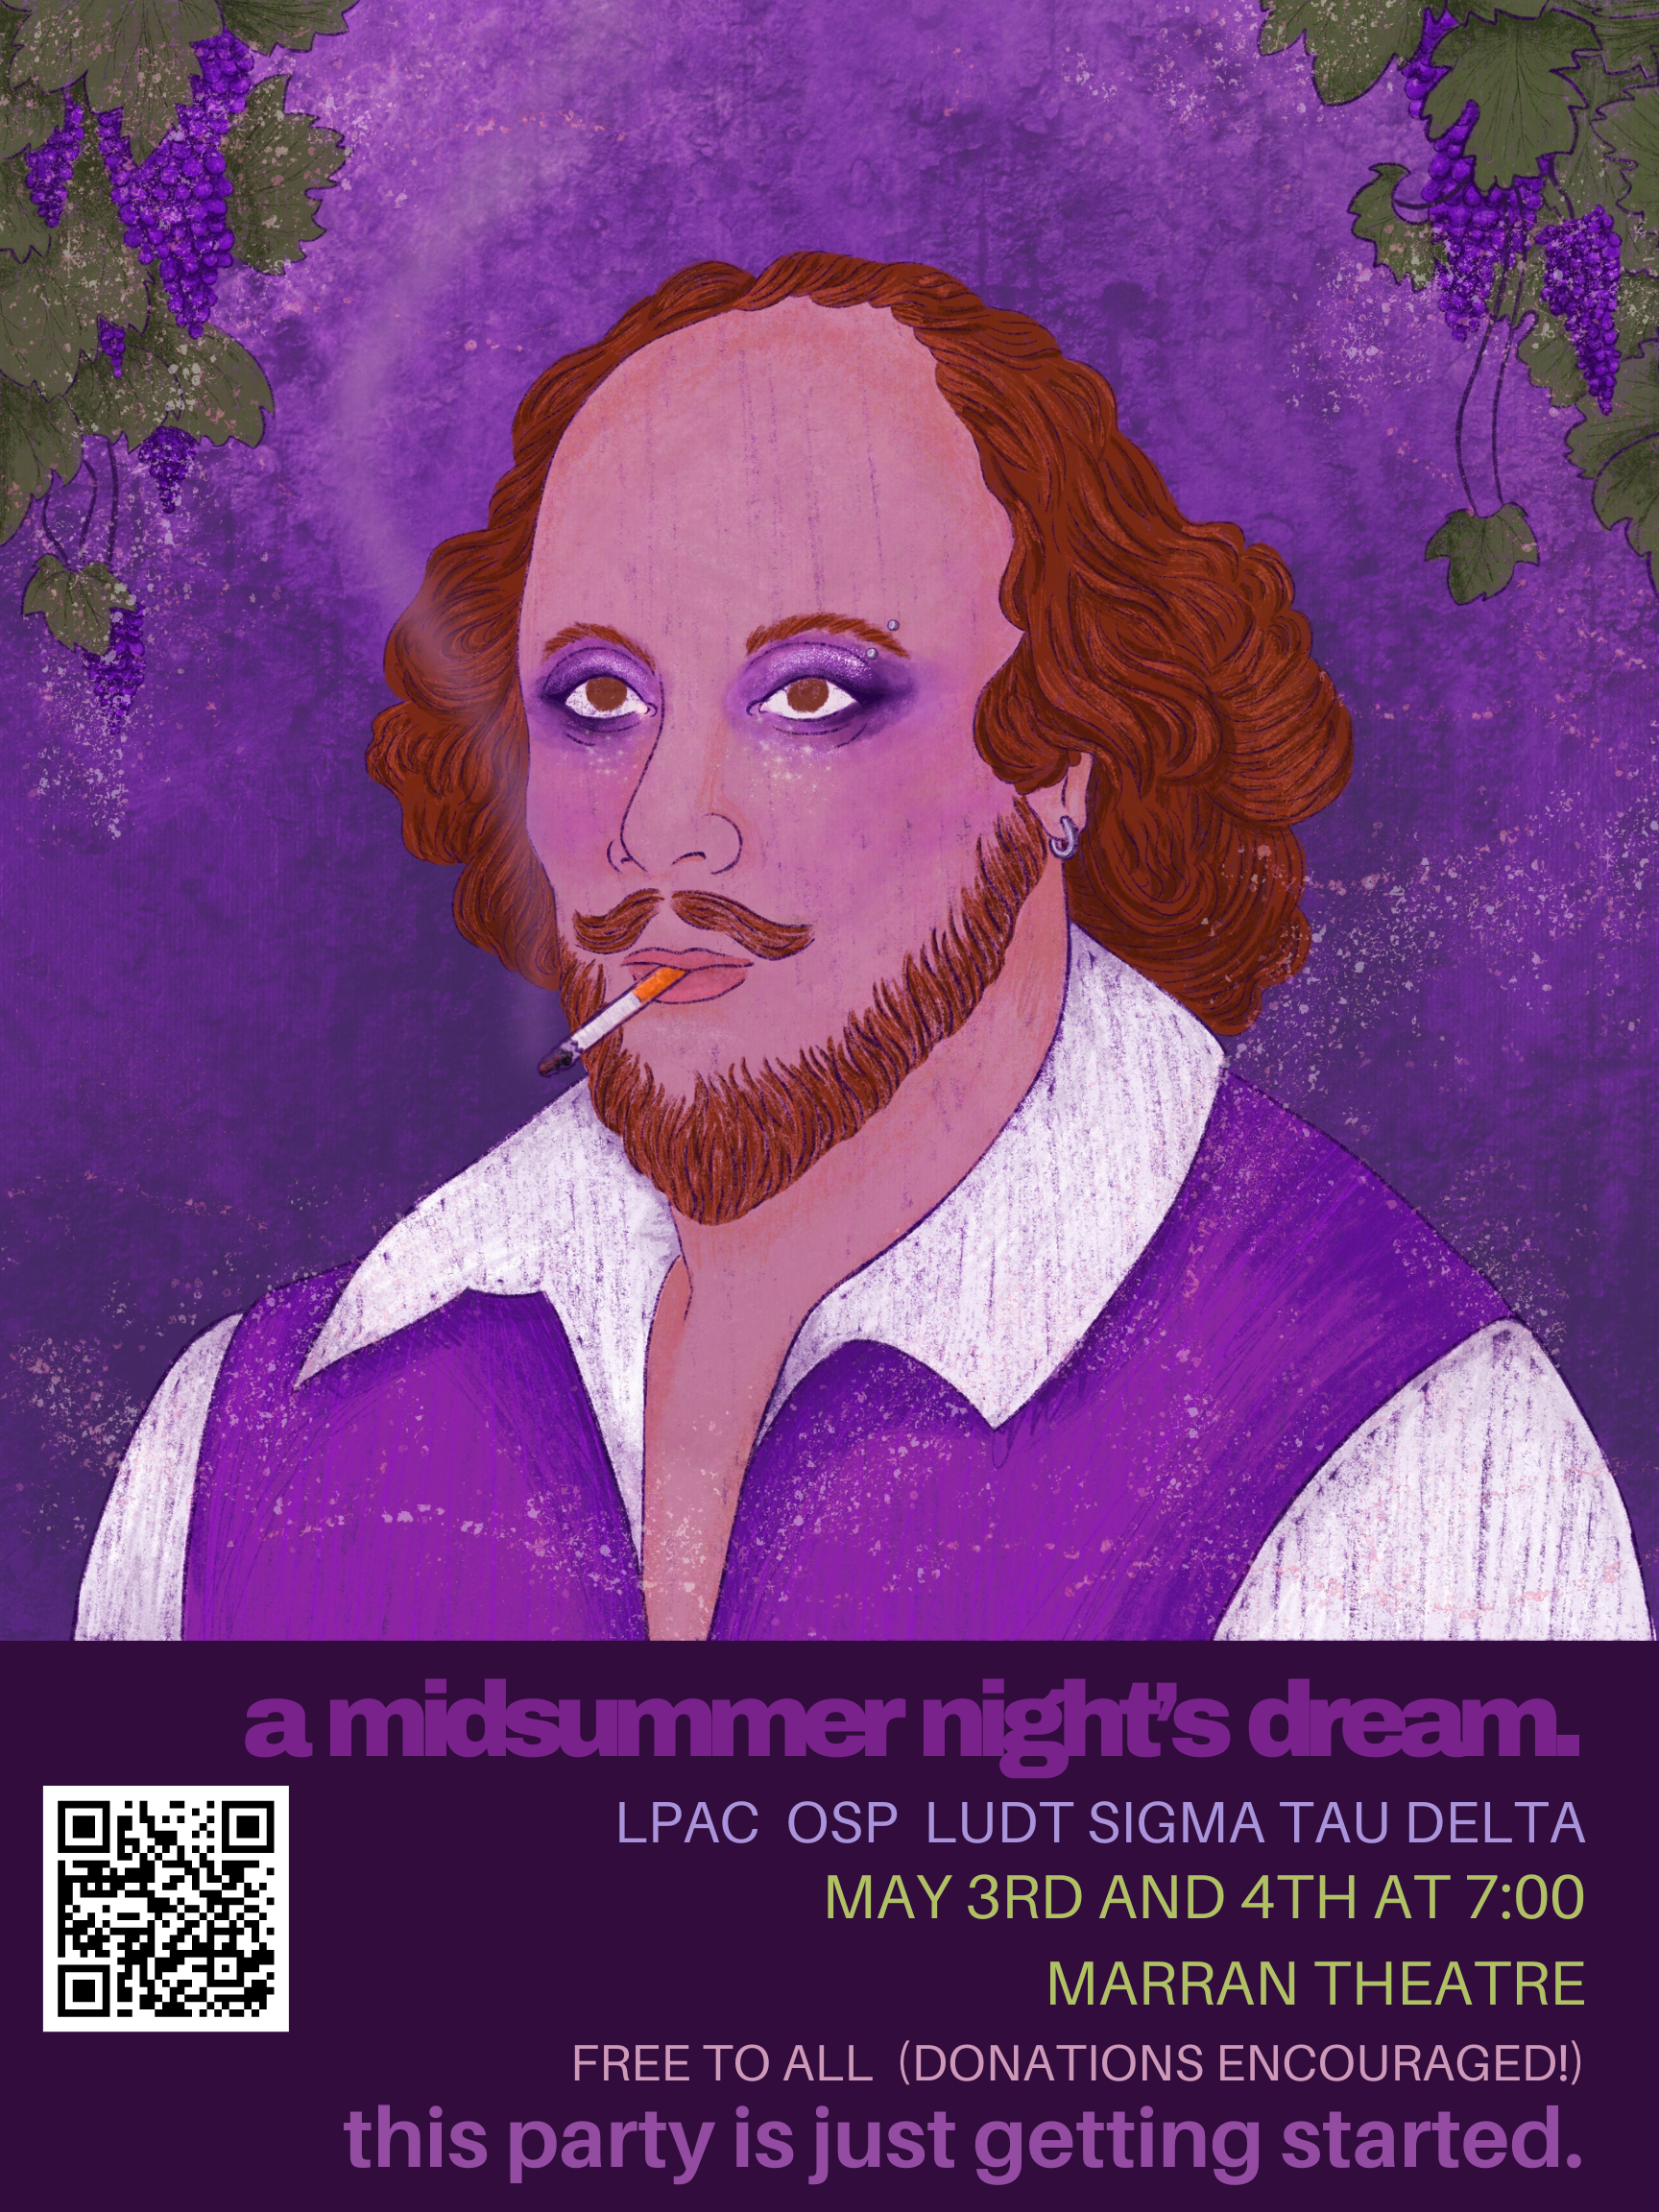 A drawn image of William Shakespeare from the chest up in a white collared shirt with a purple vest. He has a cigarette in his mouth and purple eyeshadow around his eyes. The background is puruple, with green leaves in the upper corners. 